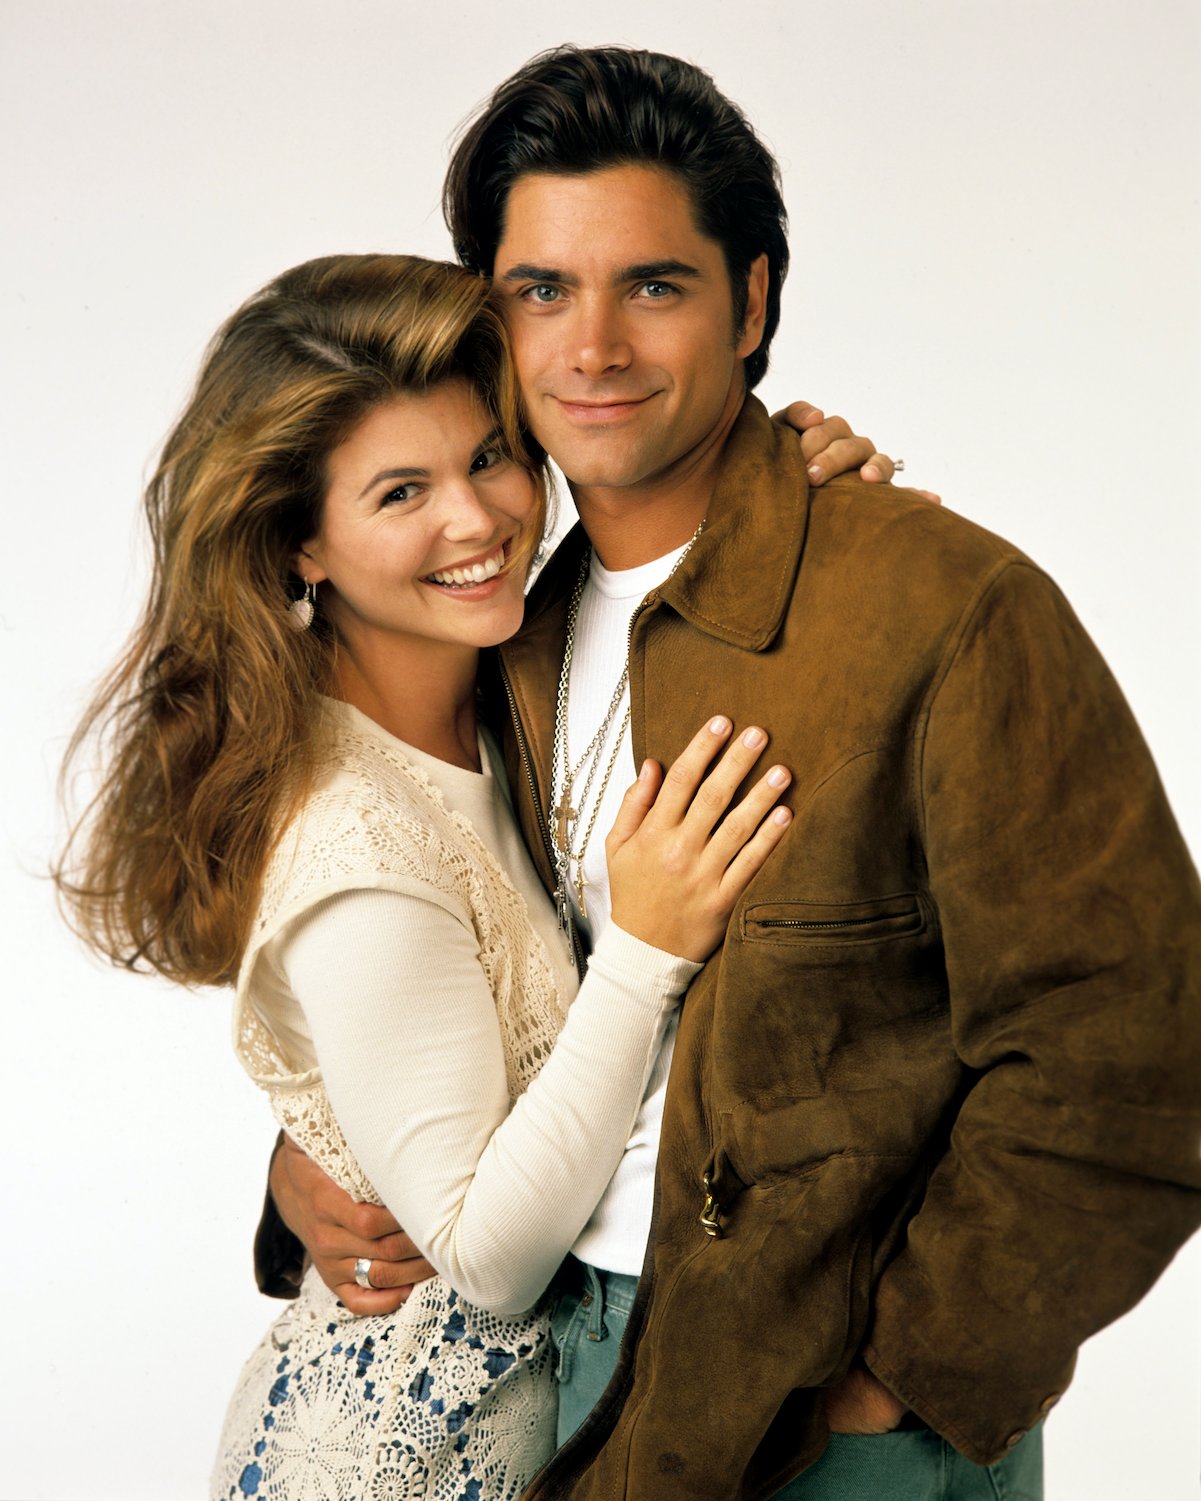 This Ironic Full House Moment Between Uncle Jessie And Aunt Becky Didnt Age Well Now That 